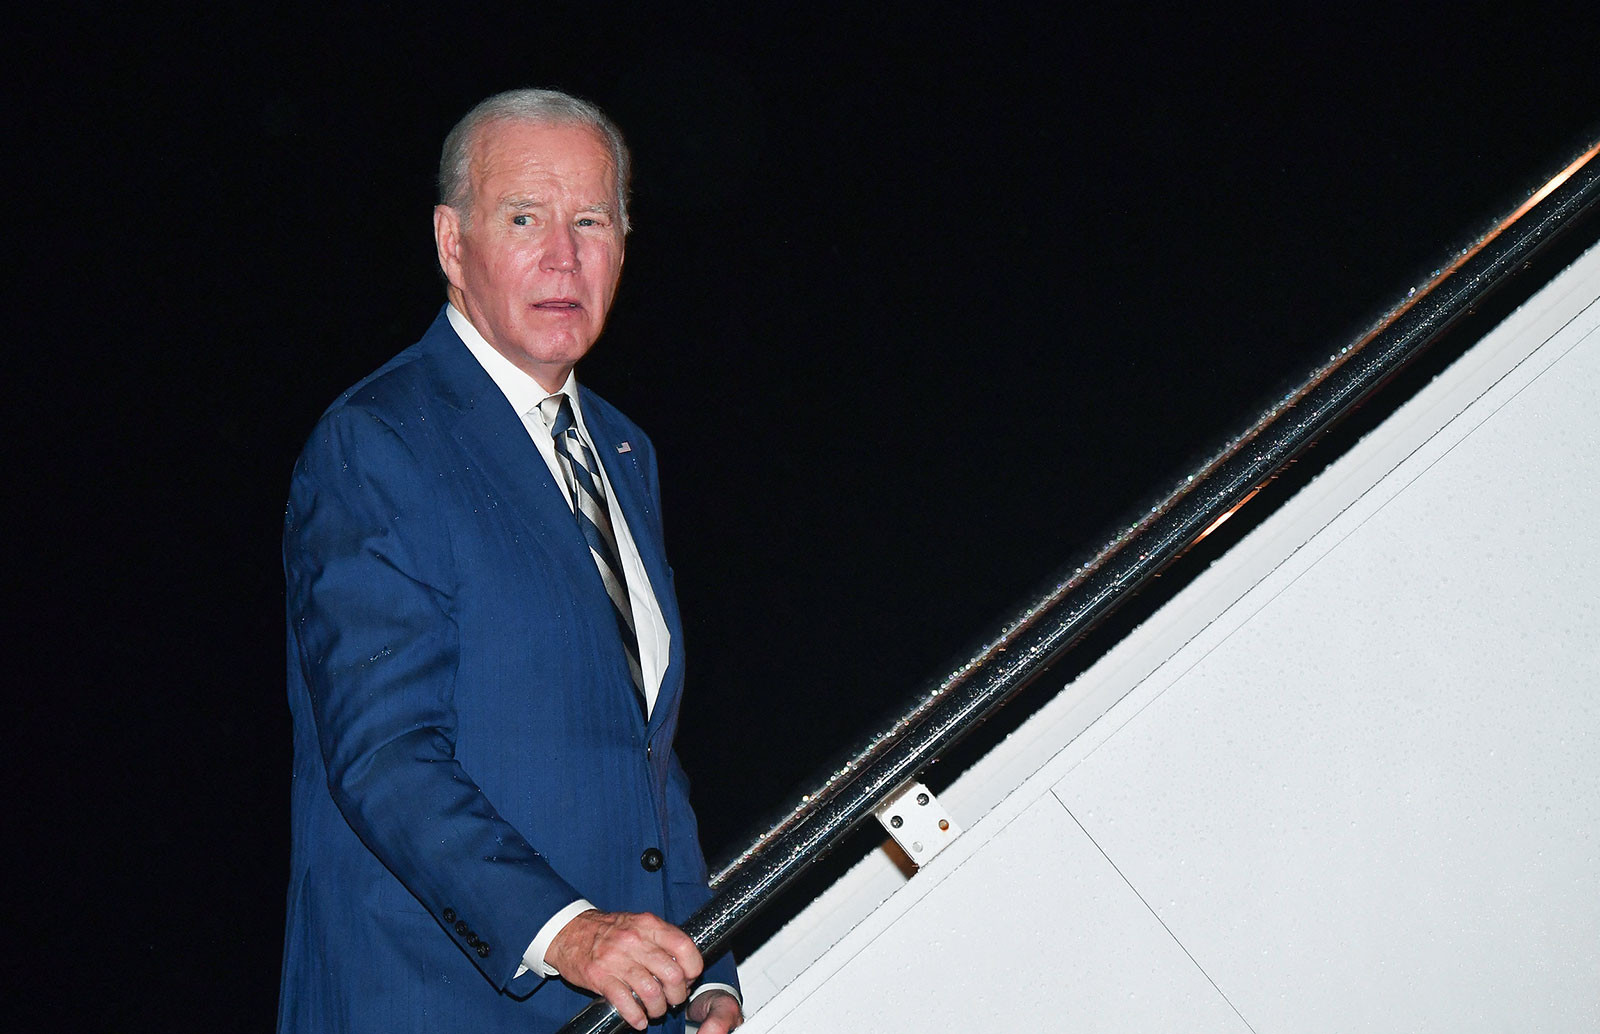 Biden boards Air Force One at Joint Base Andrews in Maryland on Friday, October 20.